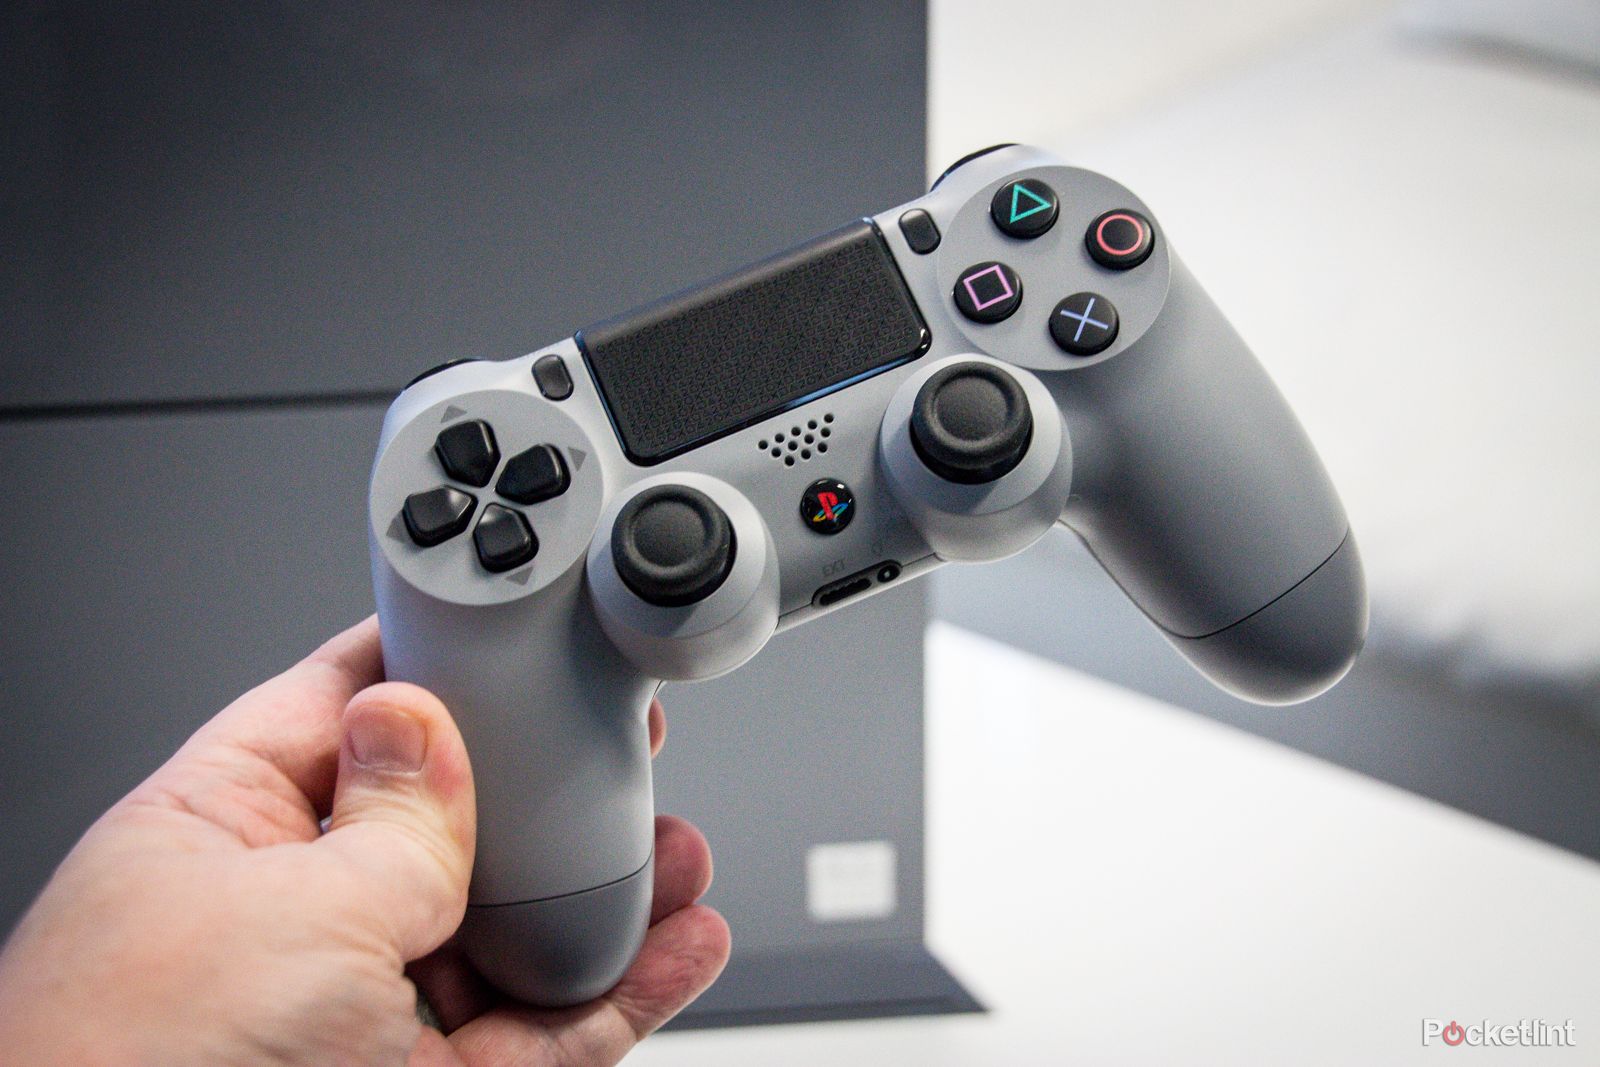 Remember the edition 20th Anniversary PS4 DualShock 4 couldn't Now you can